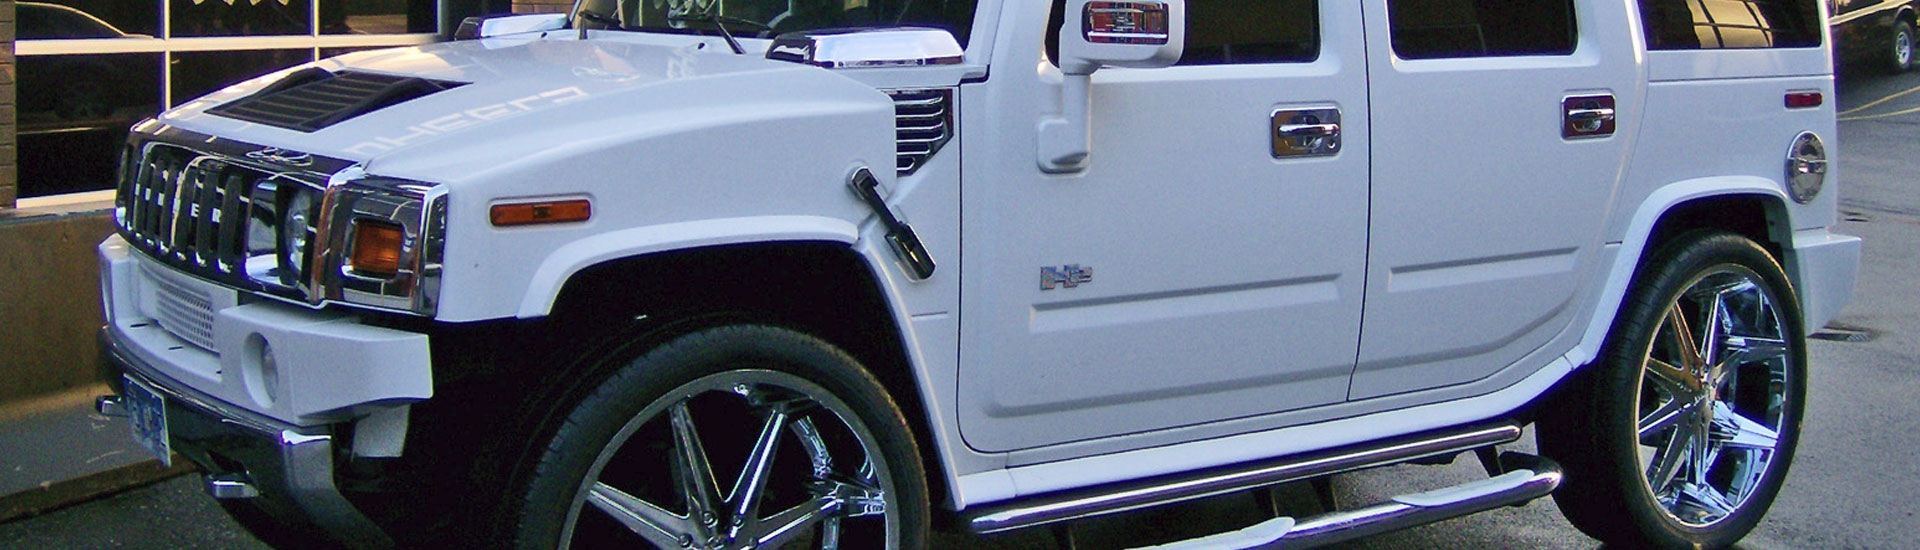 Hummer Aftermarket Accessories and Tint